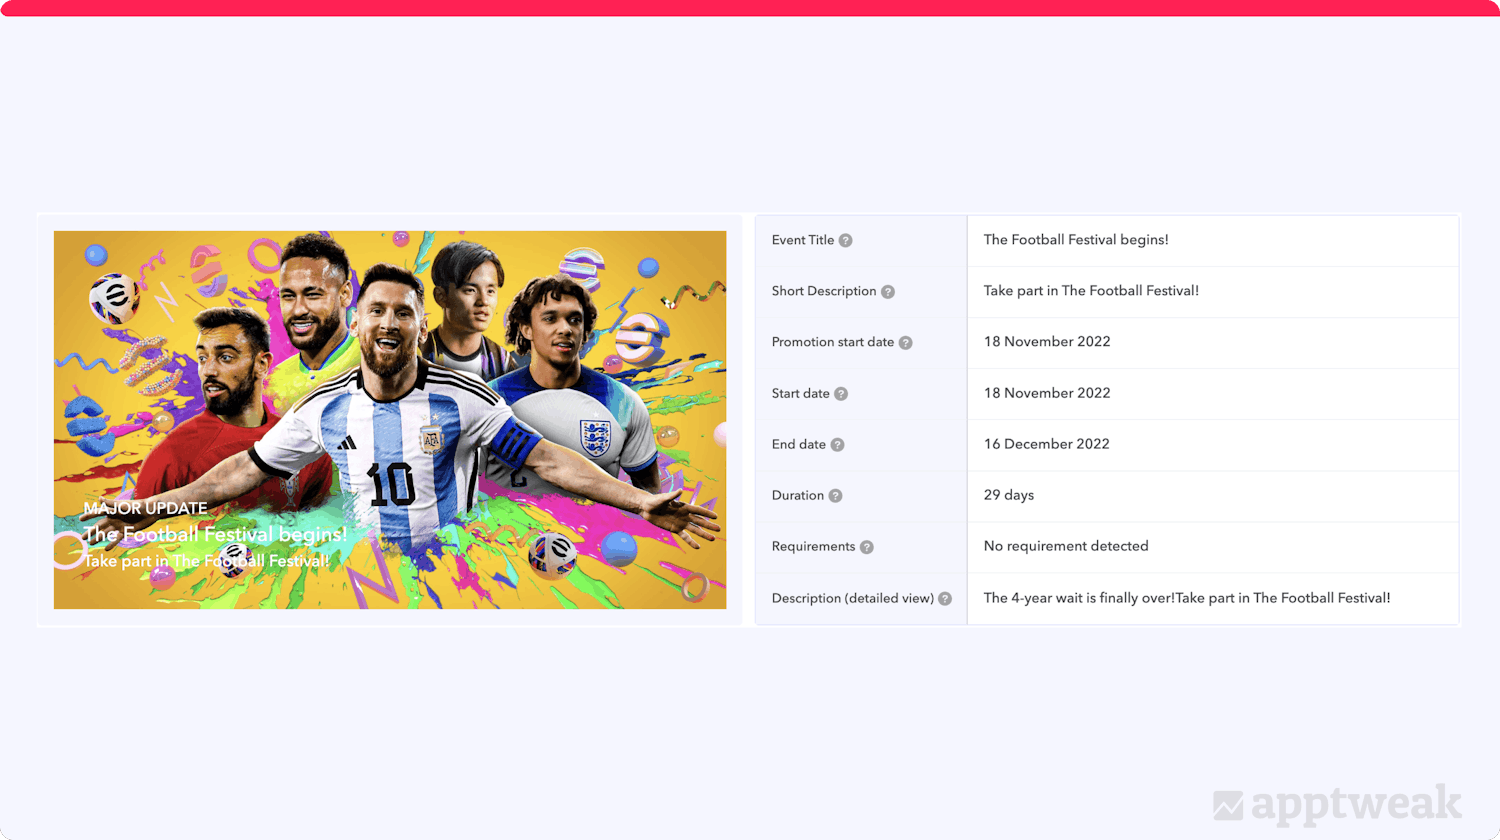 In-app events for eFootball 2023